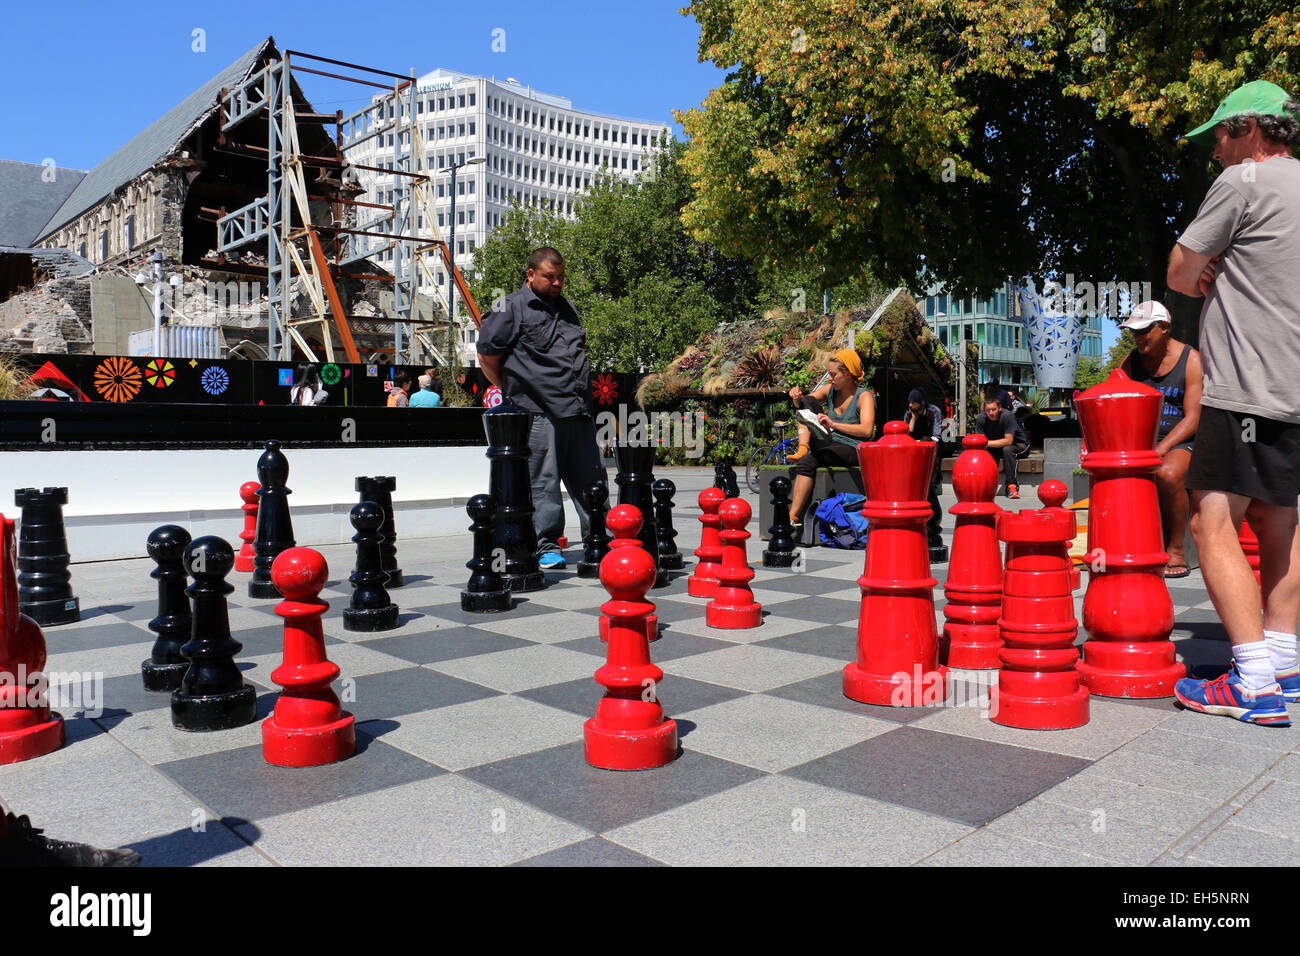 Giant Chess game outside Earthquake damage ChristChurch Cathedral Square New Zealand Stock Photo